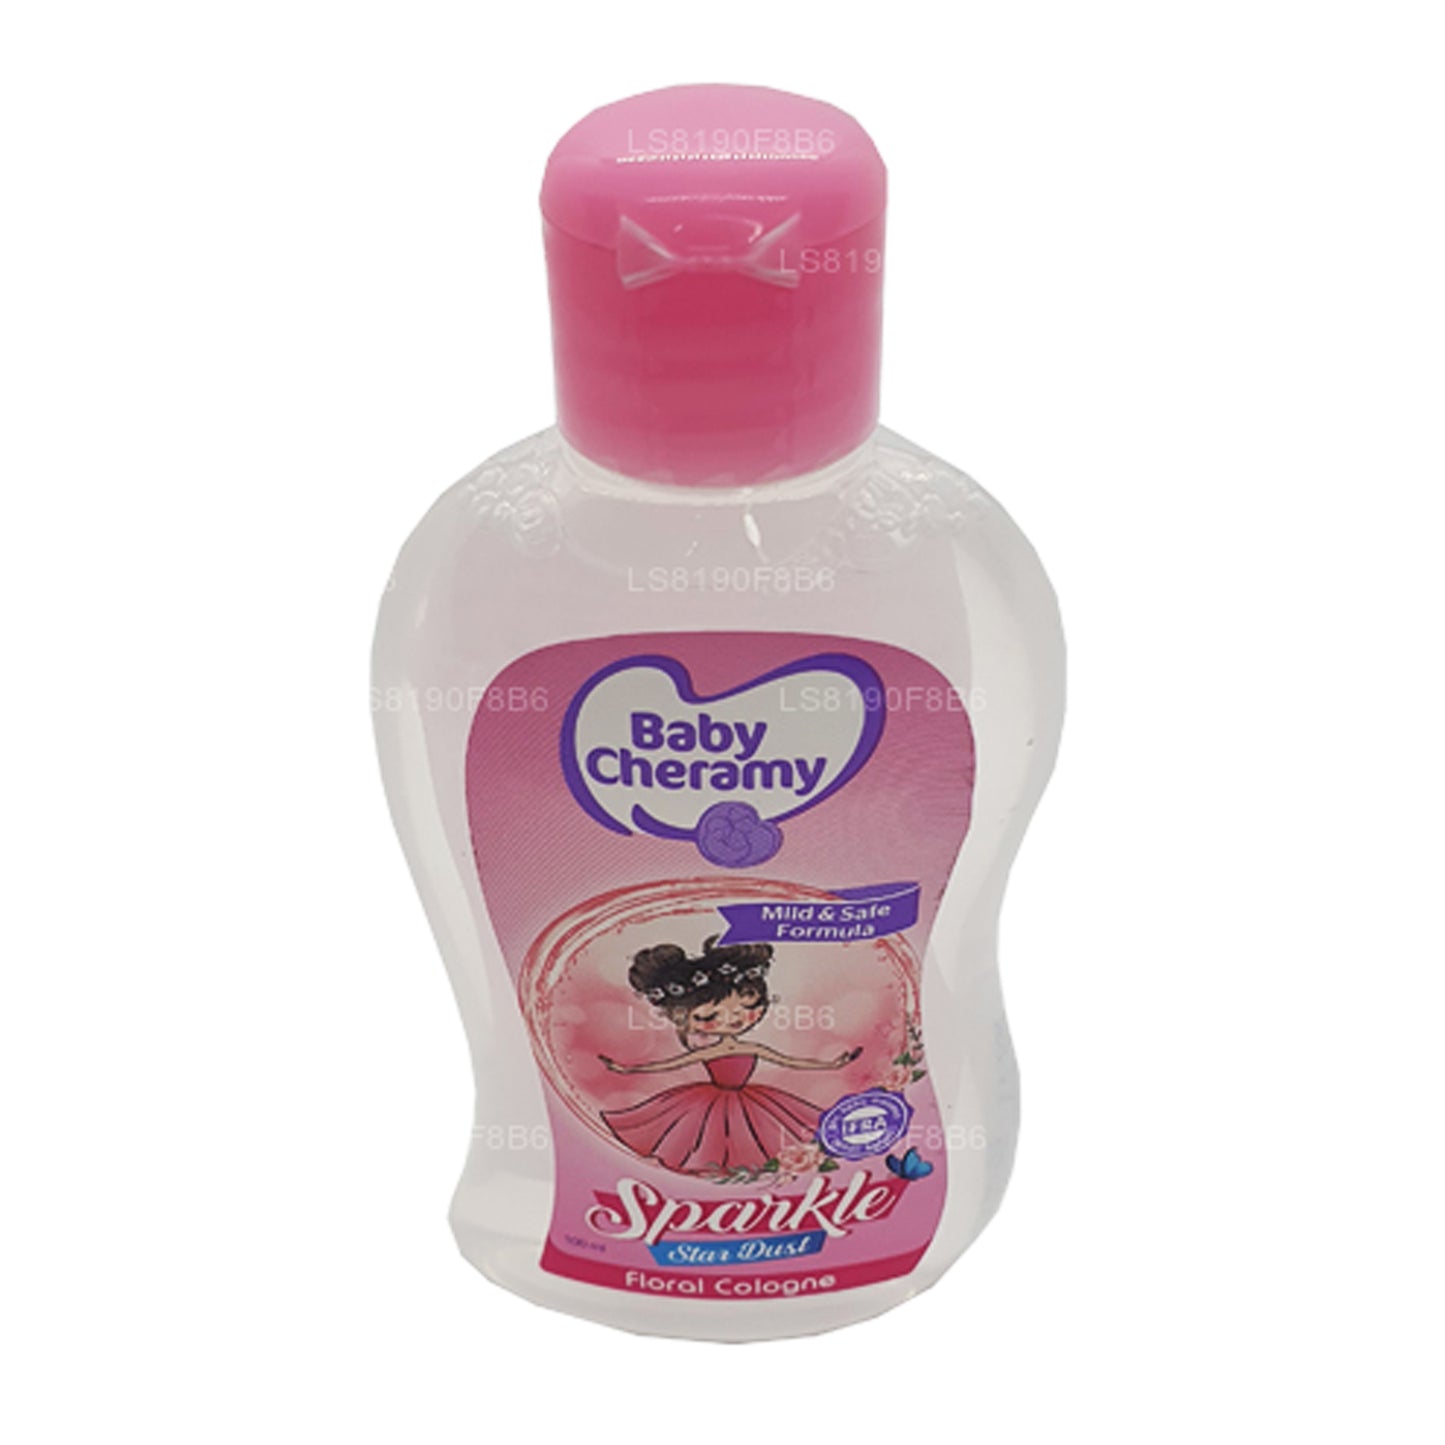 Baby Cheramy Sparkle Star Dust (Floral Cologne) 100ml